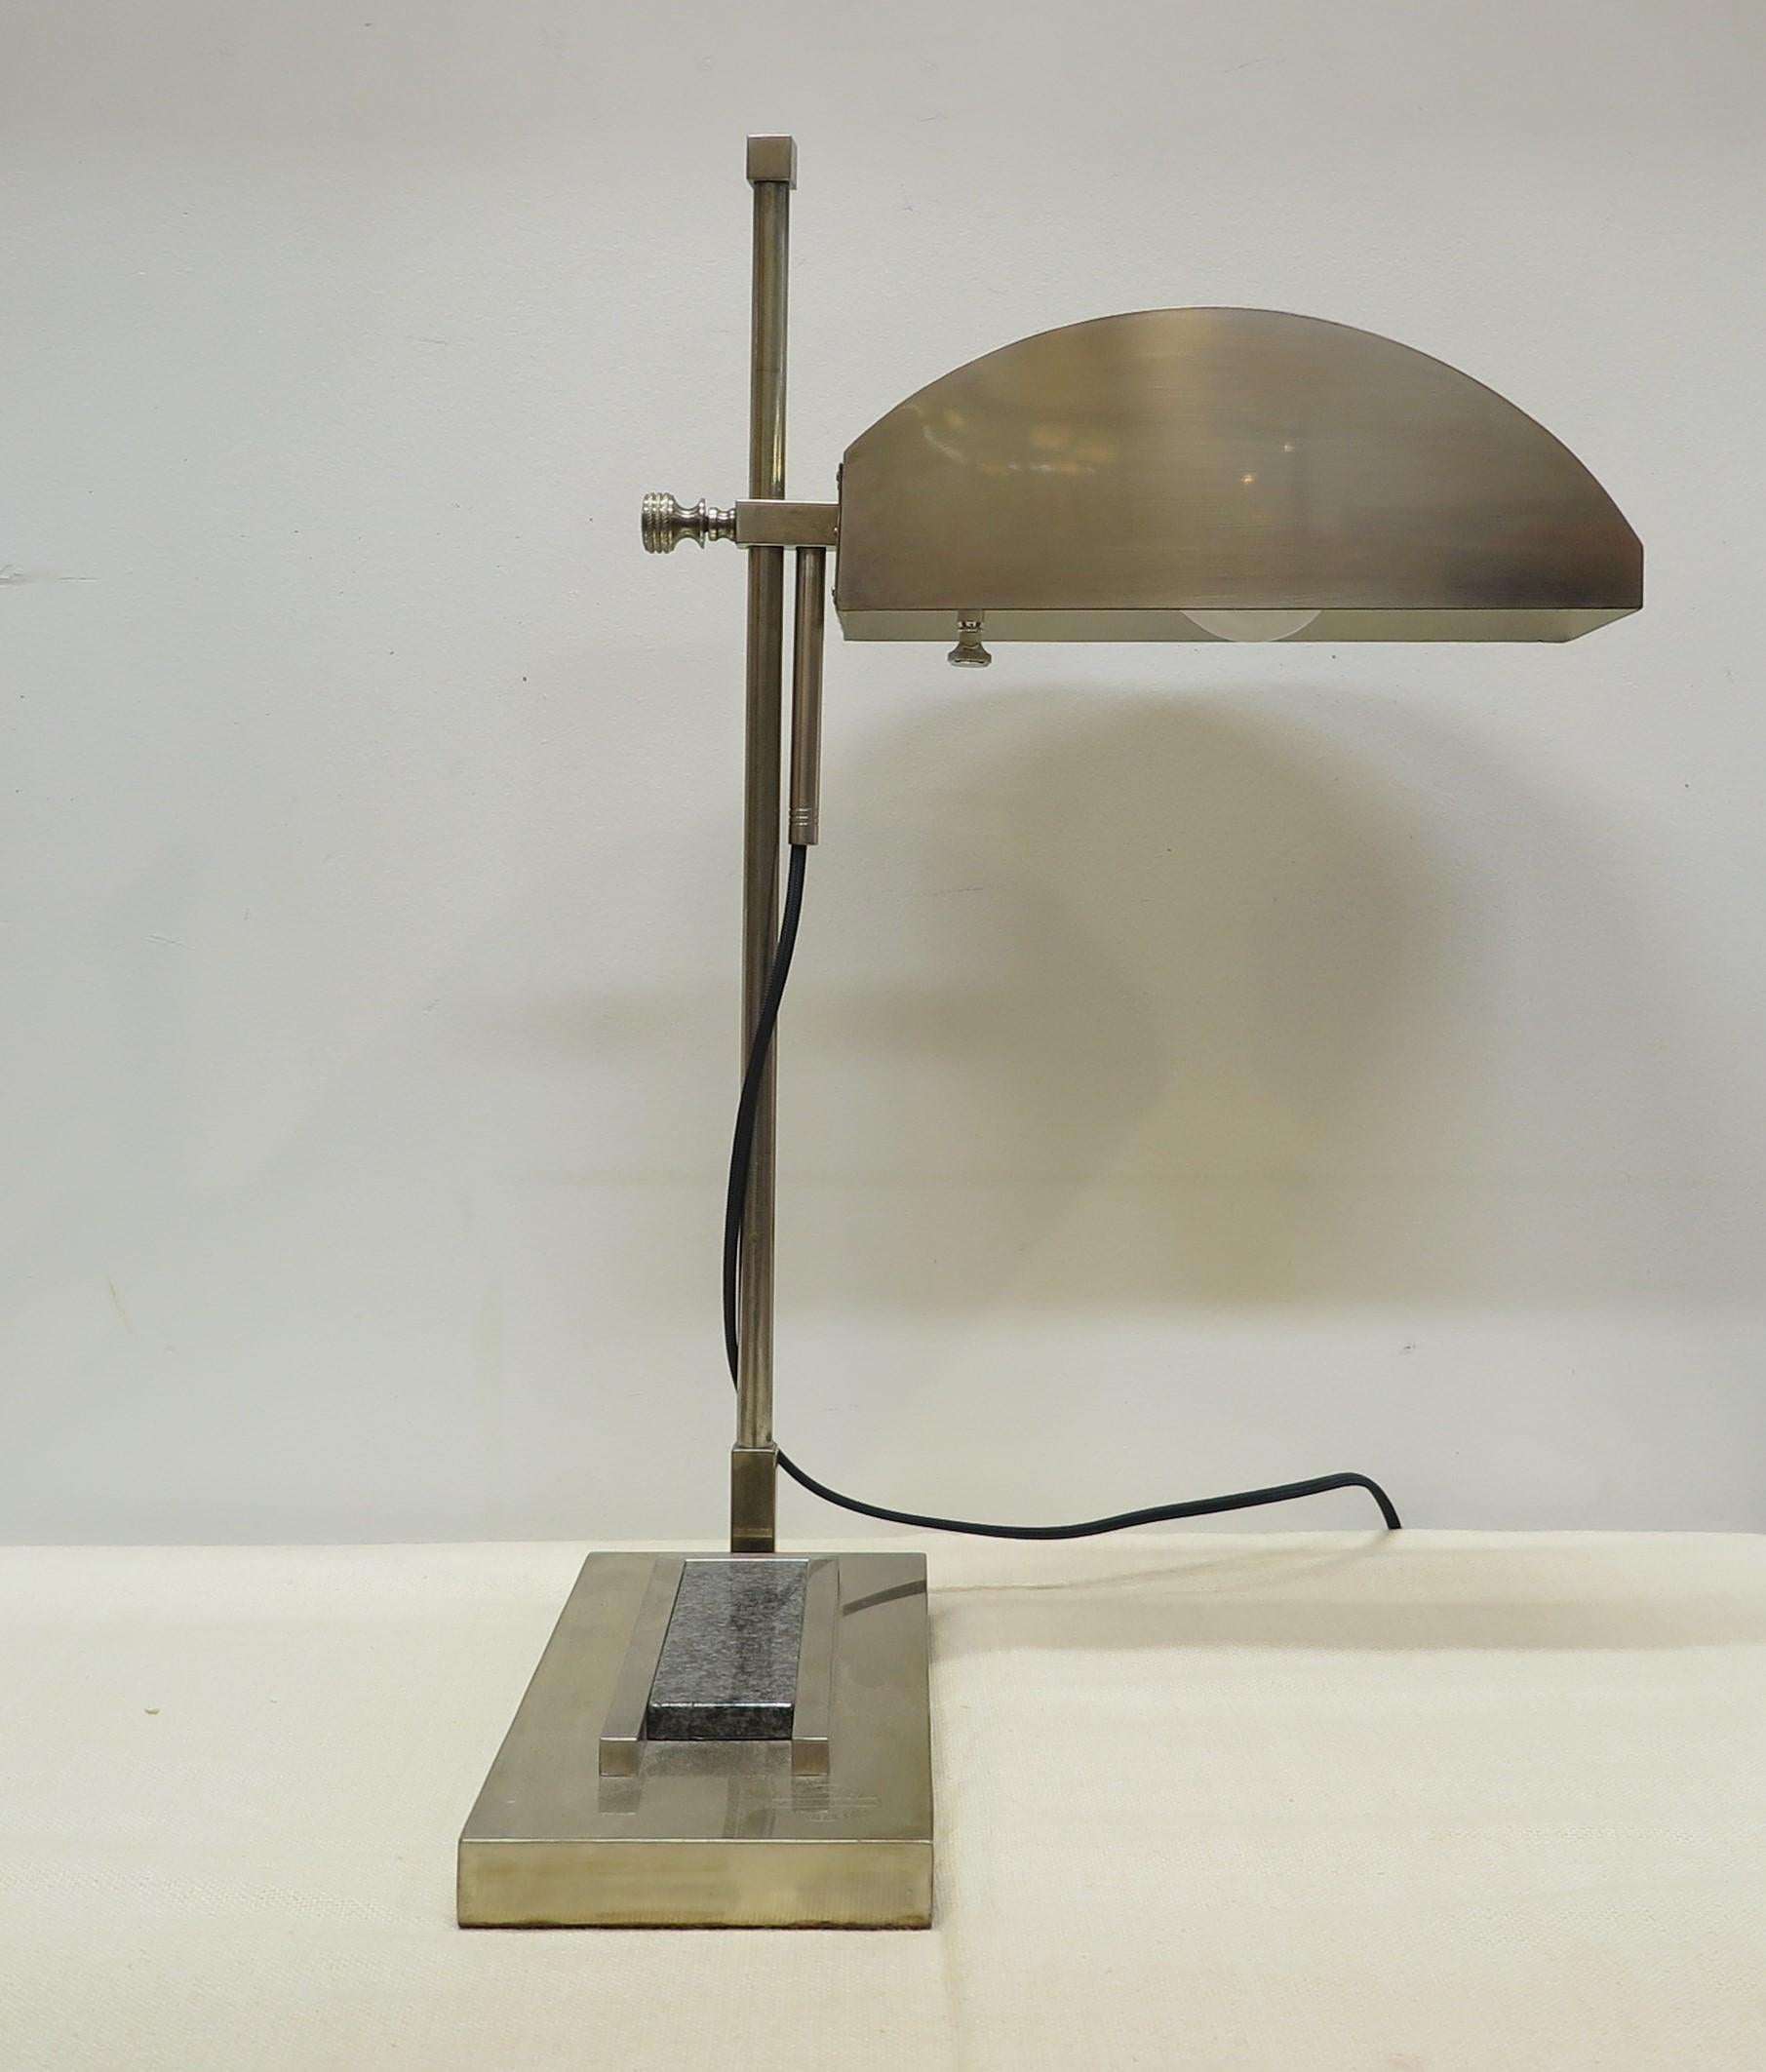 Bauhaus Articulating desk lamp by Marcel Breuer. Designed for the International Exposition of Modern Industrial and Decorative Arts, in Paris 1925, number 44 of 100. Articulating movement up and down with full 360 rotation. Composed of brass plated